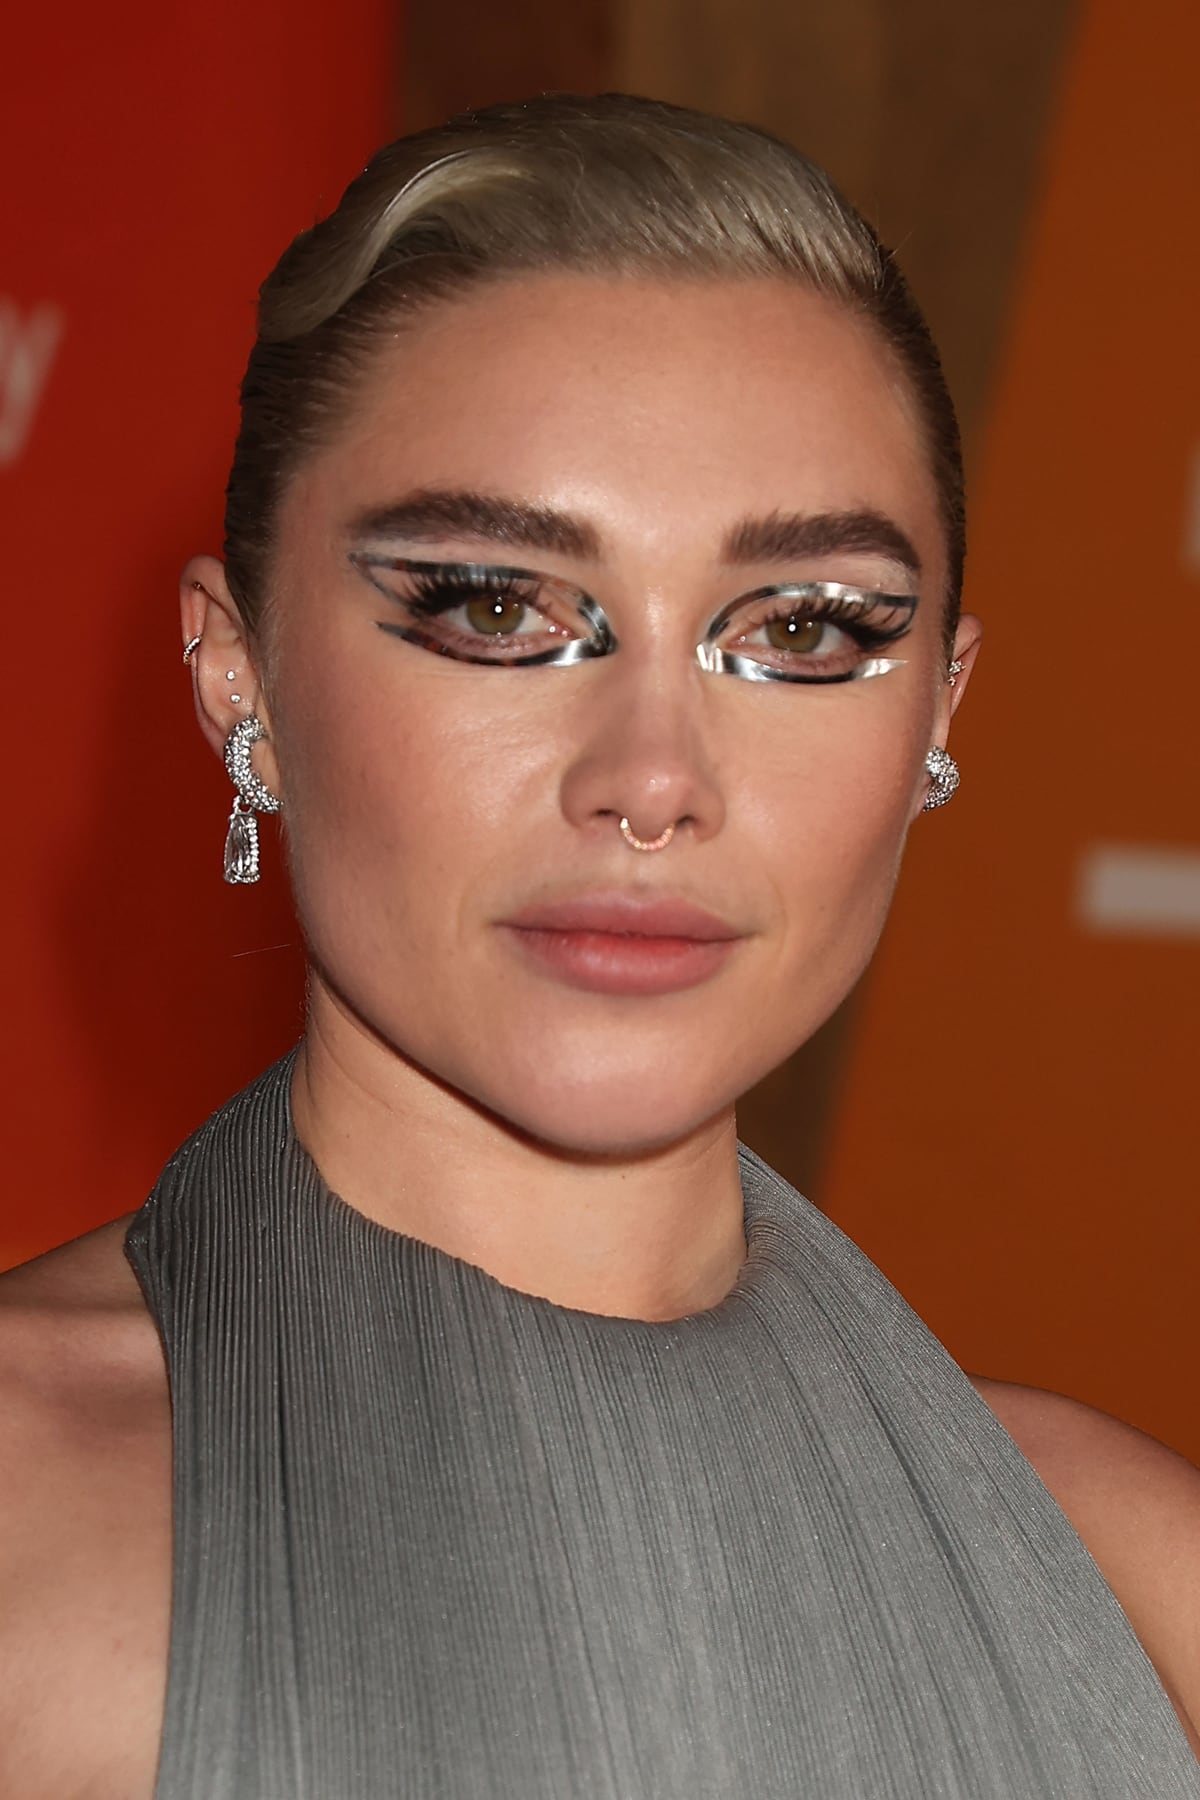 Florence Pugh captivates with her dramatic makeup at the 'Dune: Part Two' premiere, featuring graphic silver metallic eye makeup and bold brows, creating an otherworldly elegance that perfectly complements her Valentino gown